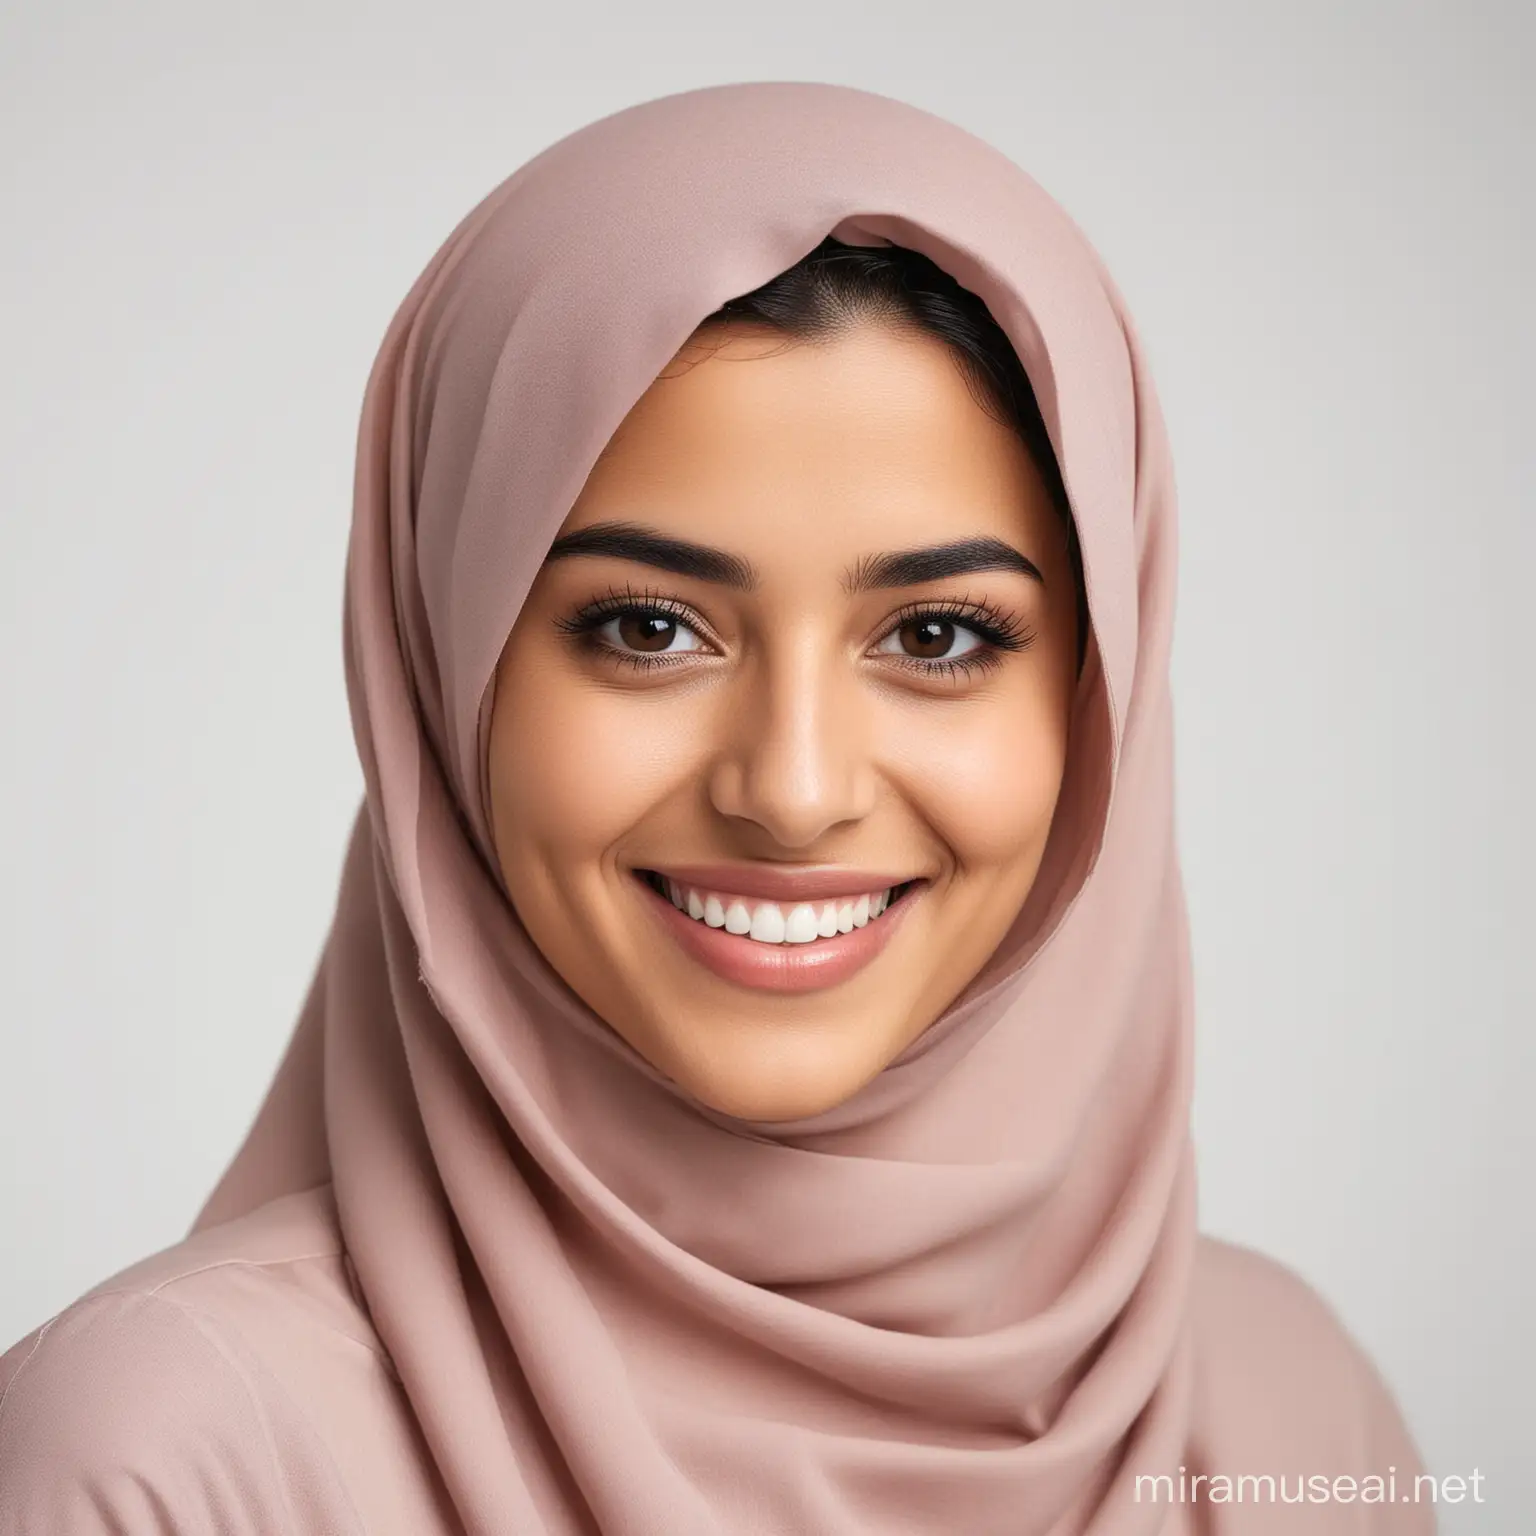 a saudi woman modern and young smiling and behind her a white background